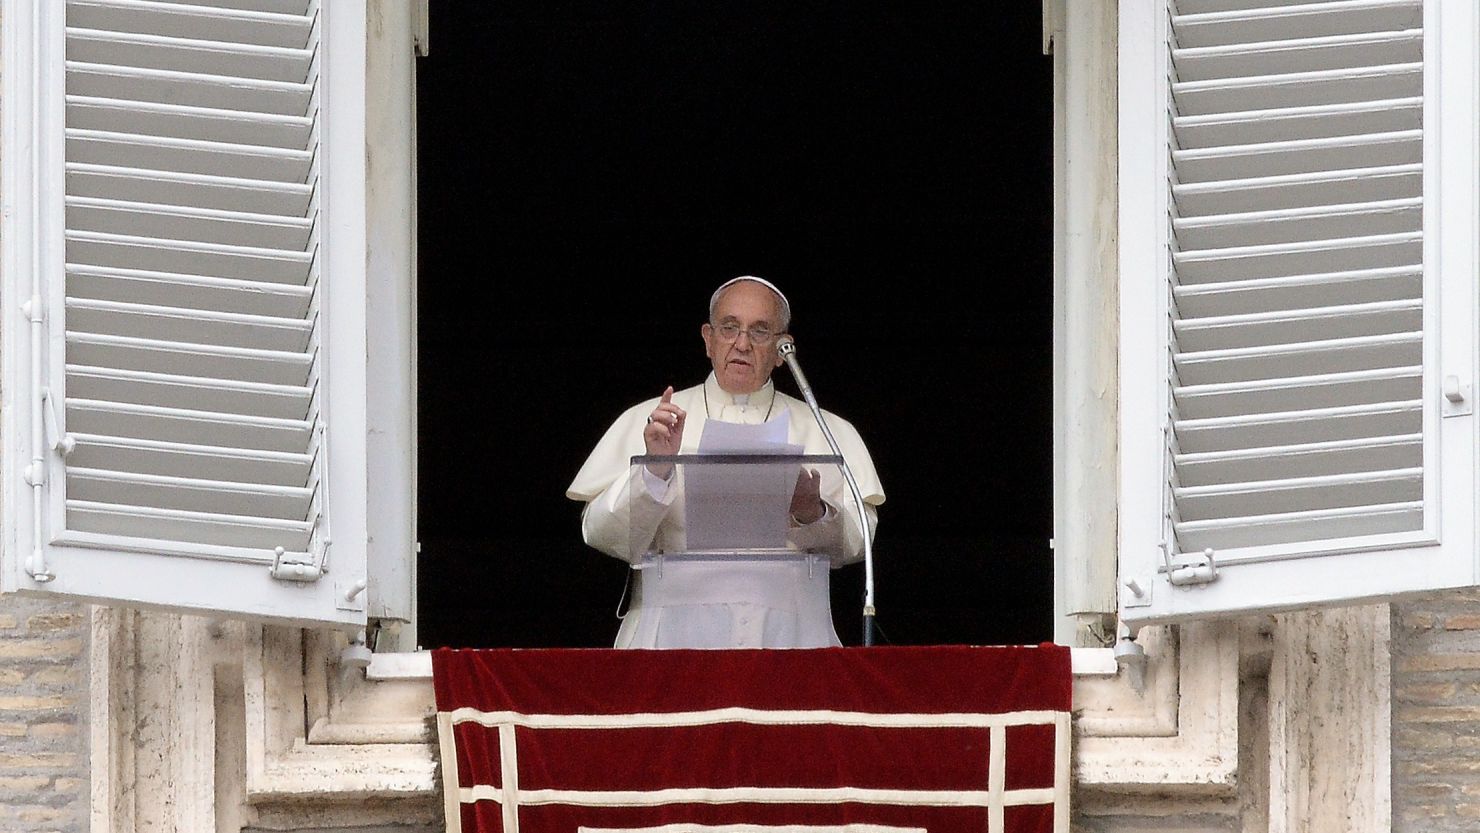 Pope Francis called for renewed efforts towards peace in the Middle East before Sunday's Angelus prayer.